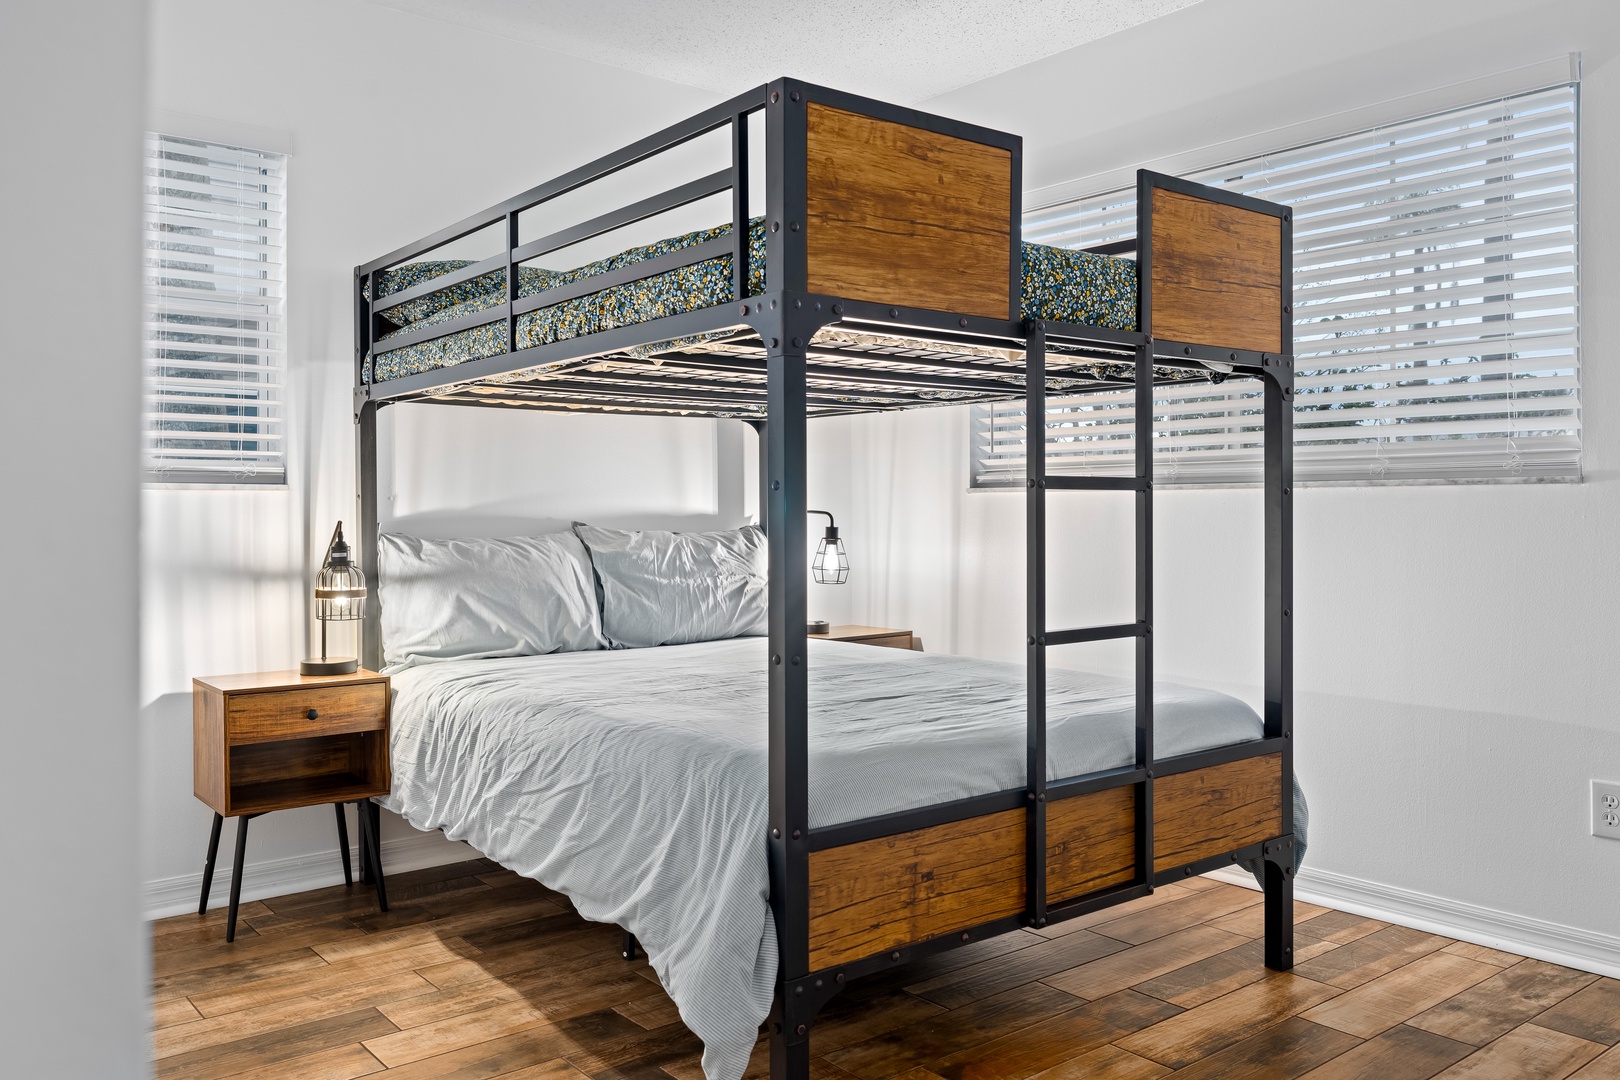 The second serene bunk bedroom features full-over-full bunk beds